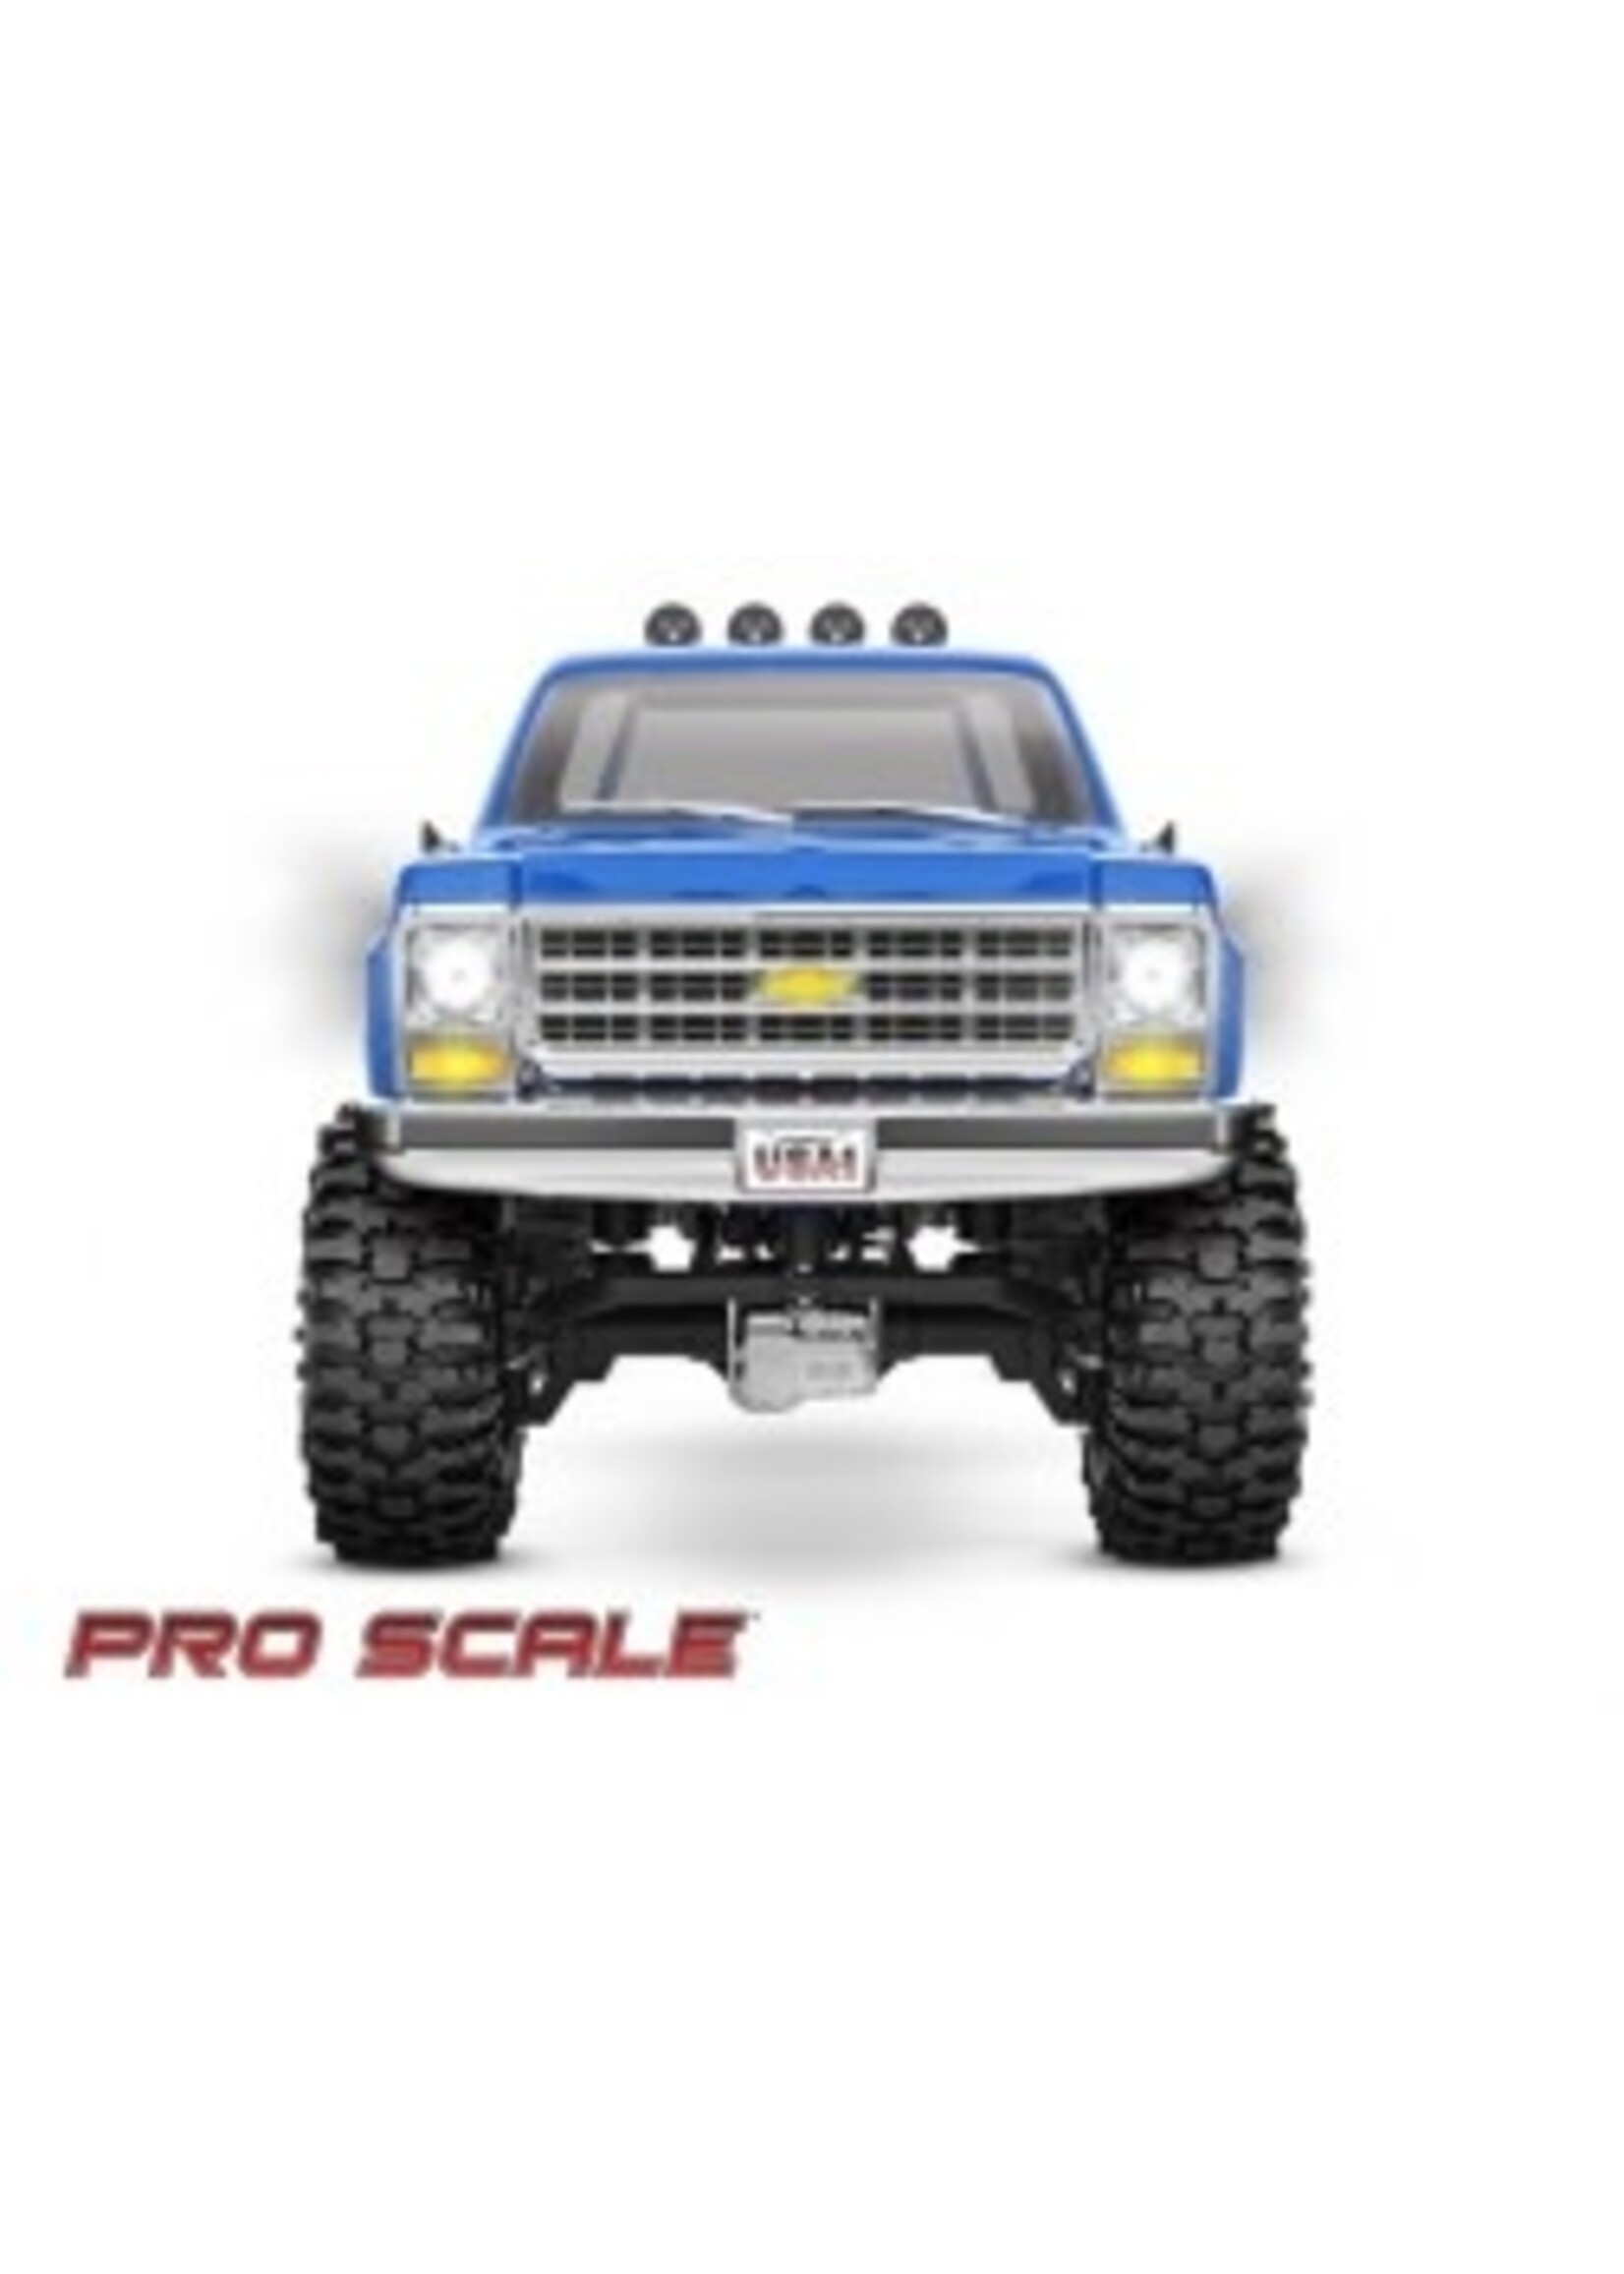 Traxxas 9883 Pro Scale® LED light set, front & rear, complete